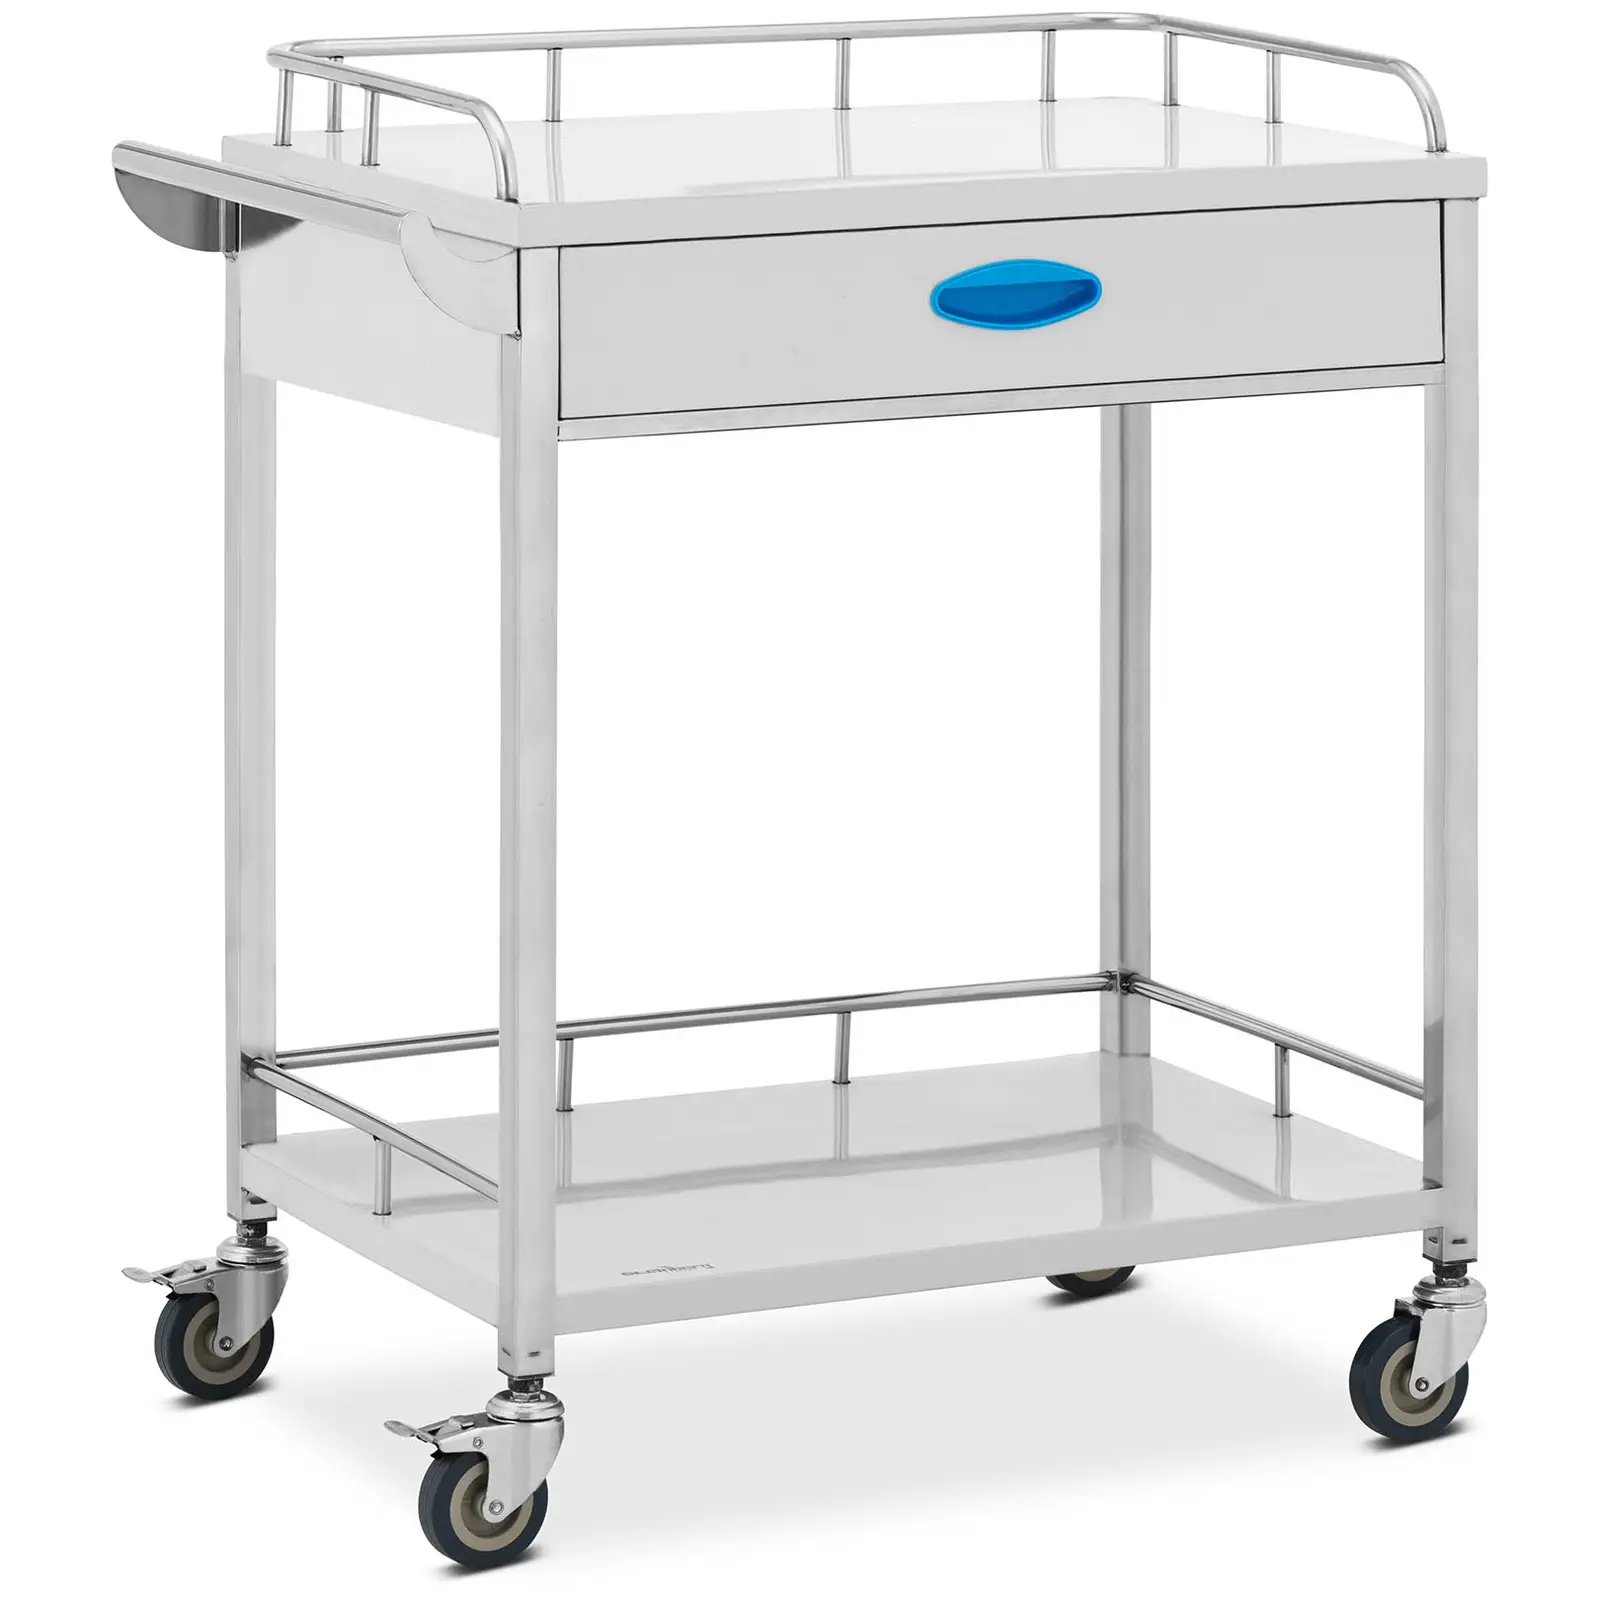 Factory second Laboratory Trolley - stainless steel - 2 shelves each 60 x 41 x 14.5 cm - 1 drawer - 40 kg